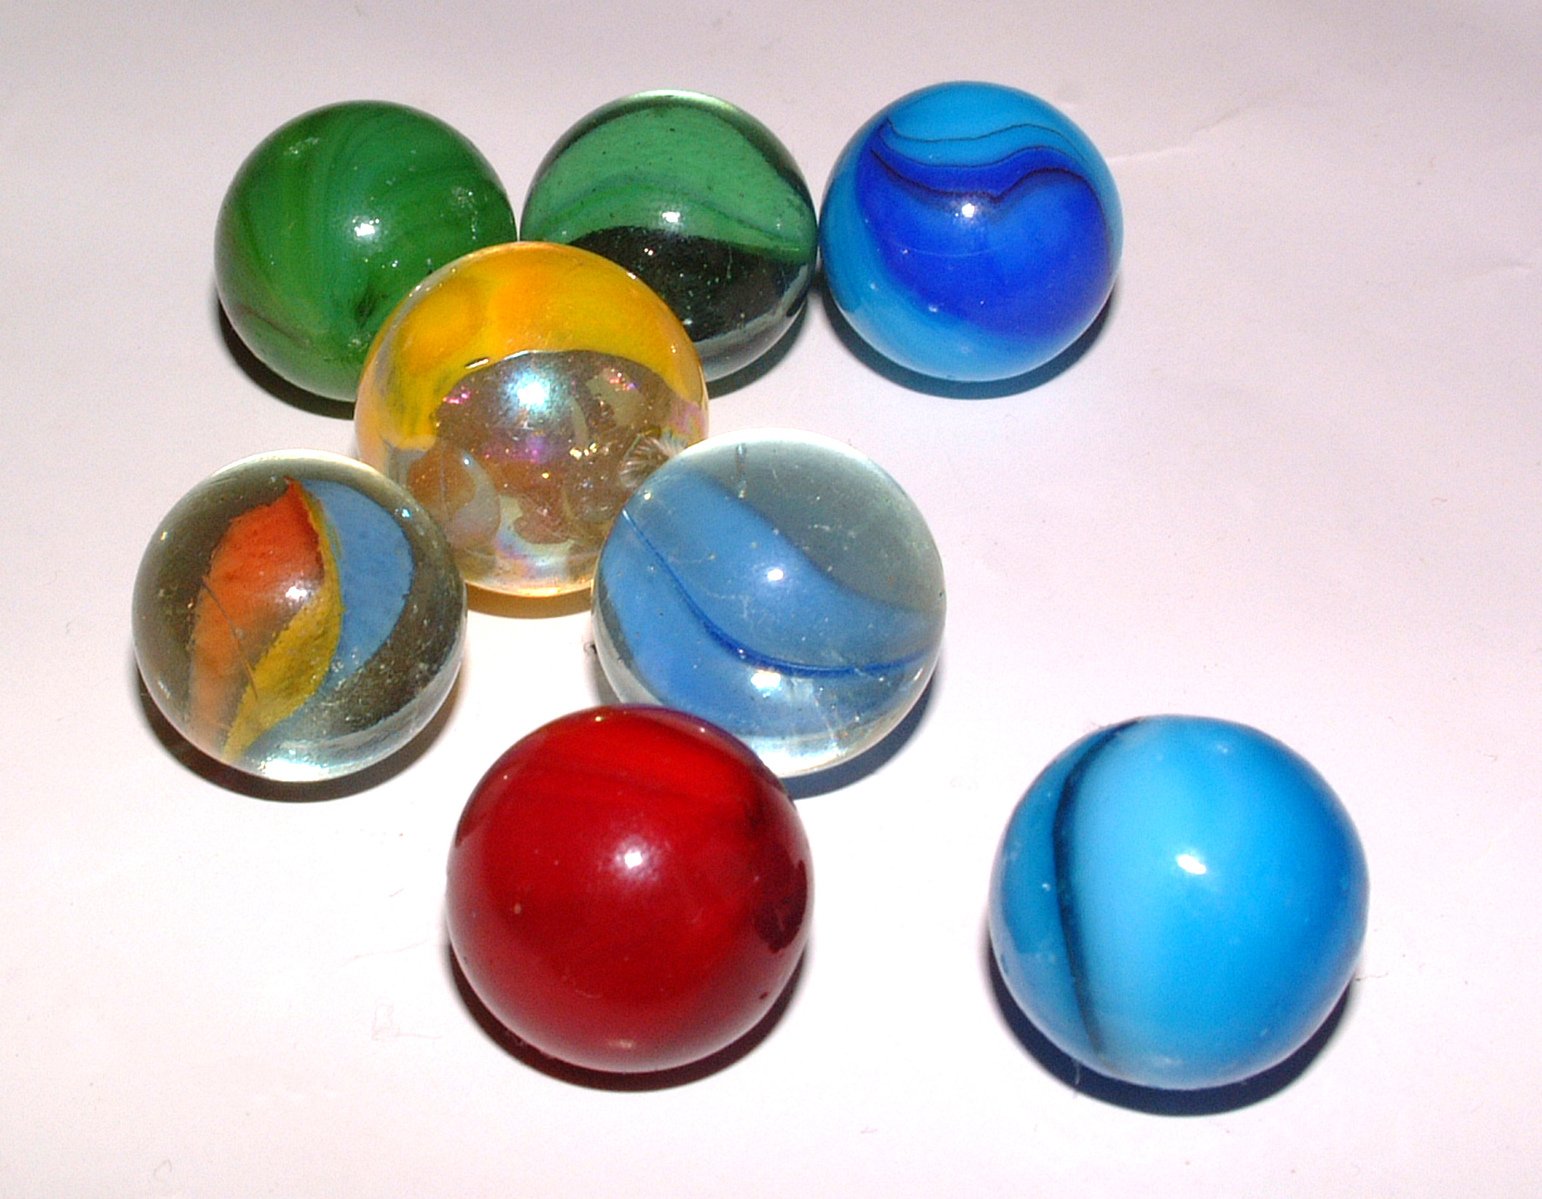 some glass marbles sitting on a white surface